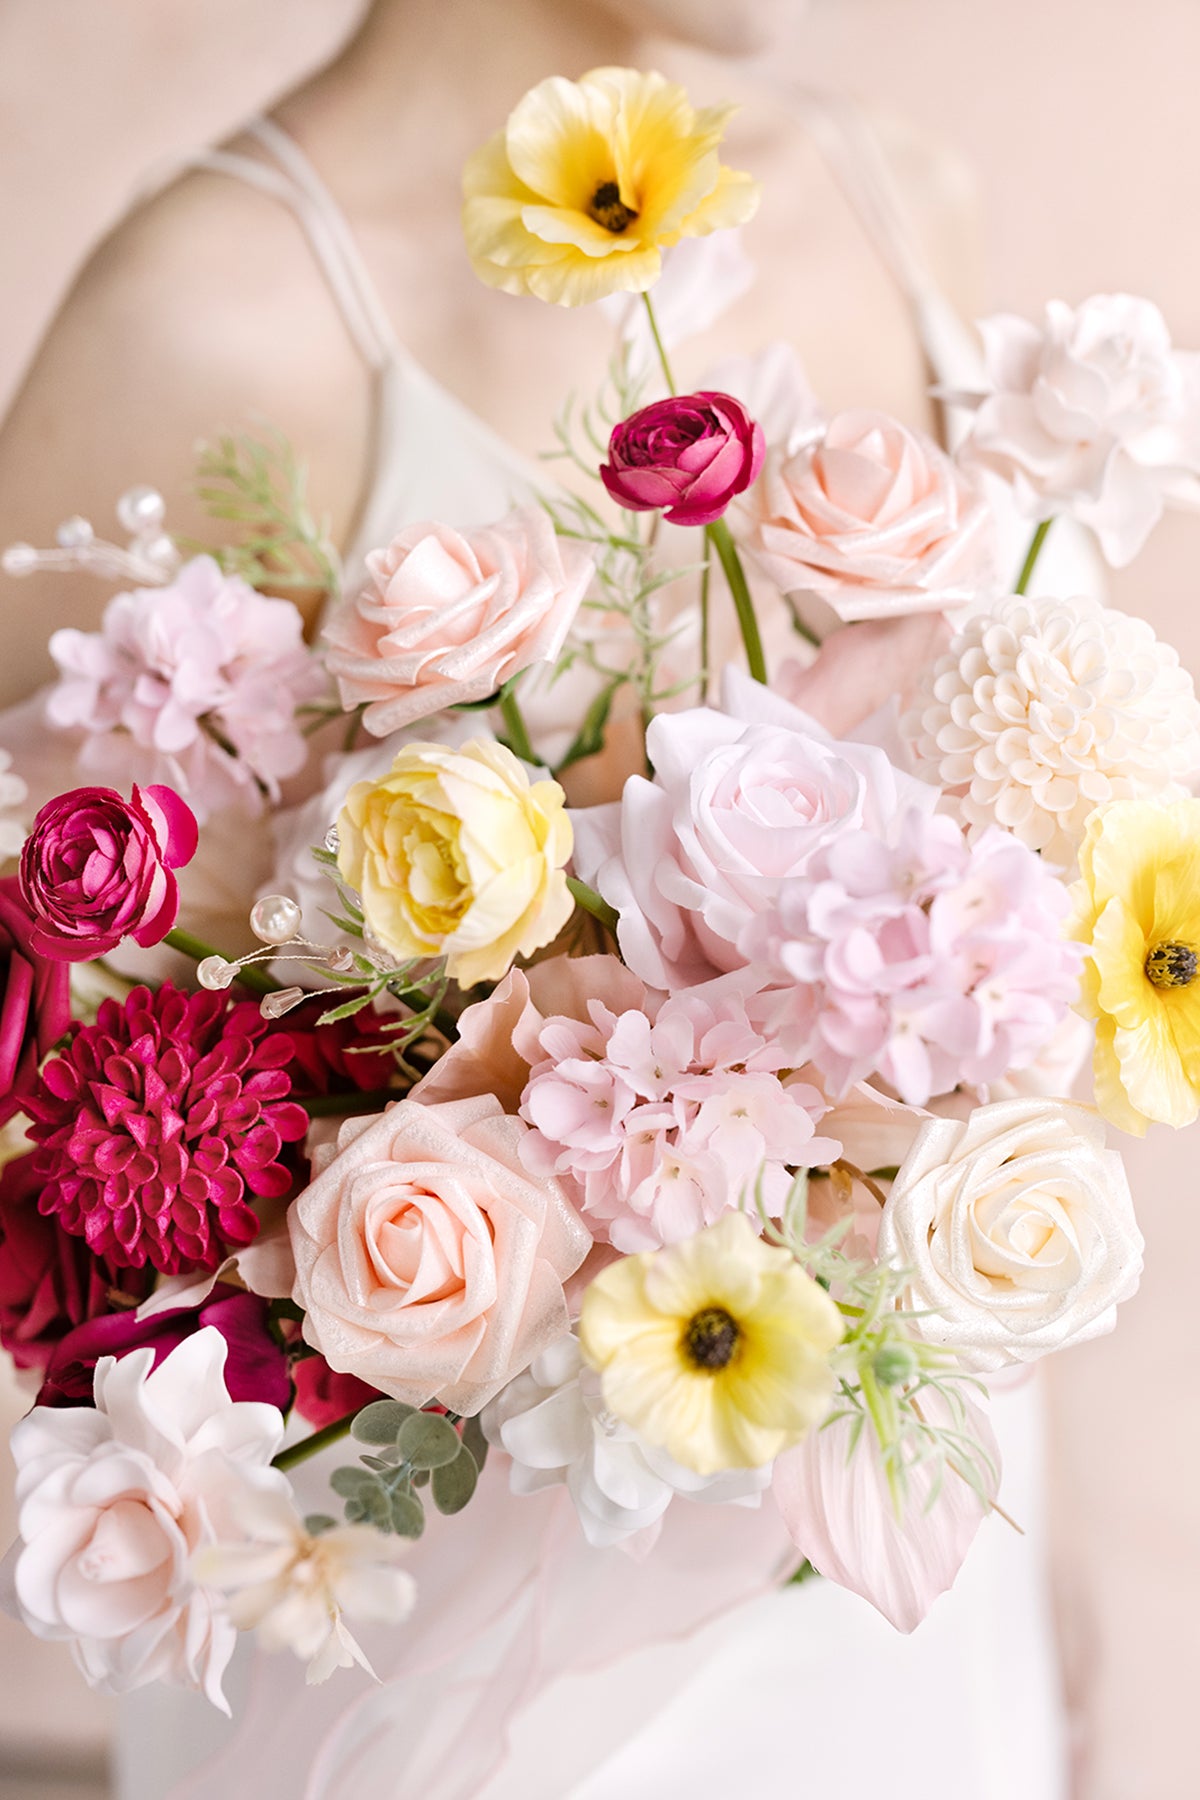 Small Free-Form Bridal Bouquet in Passionate Pink & Blush